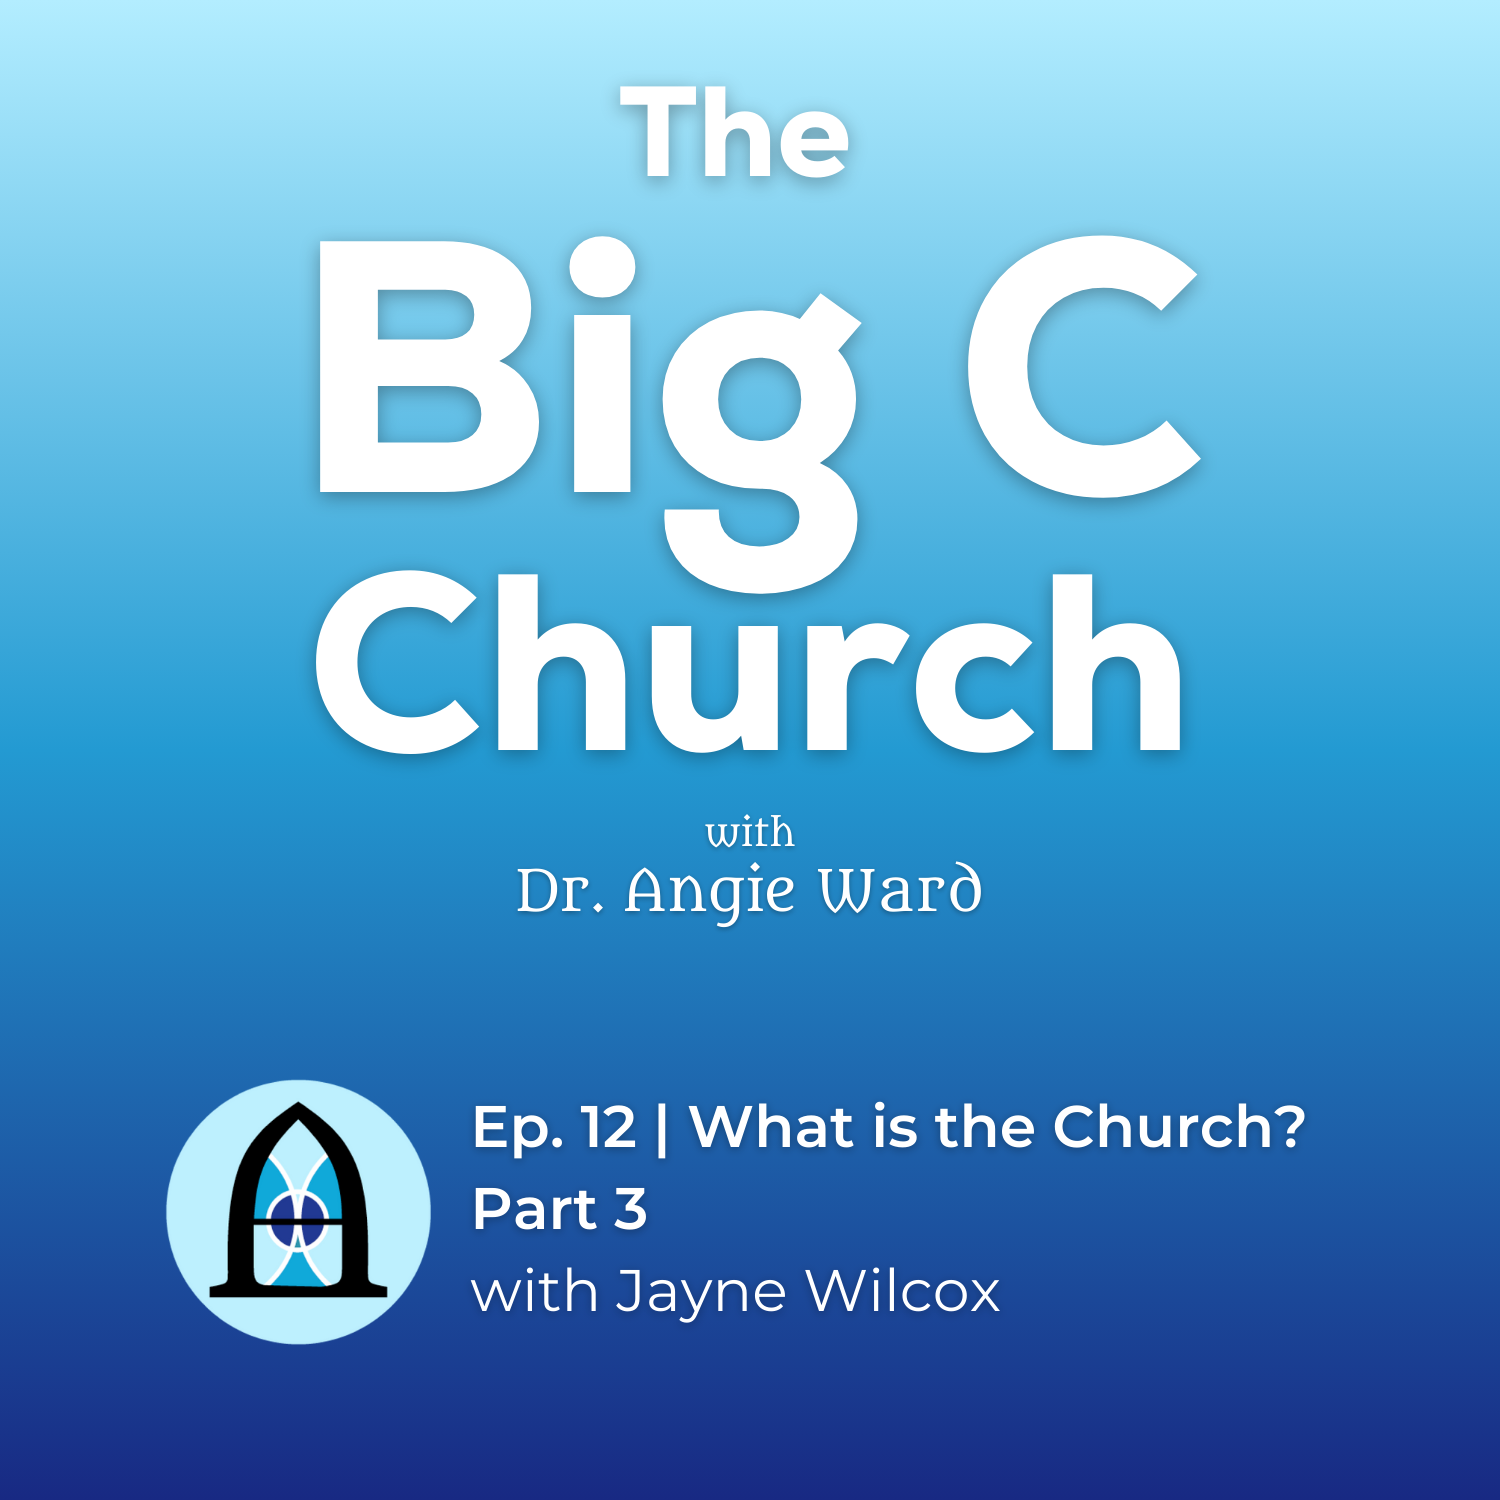 What is the Church? Part 3 with Jayne Wilcox